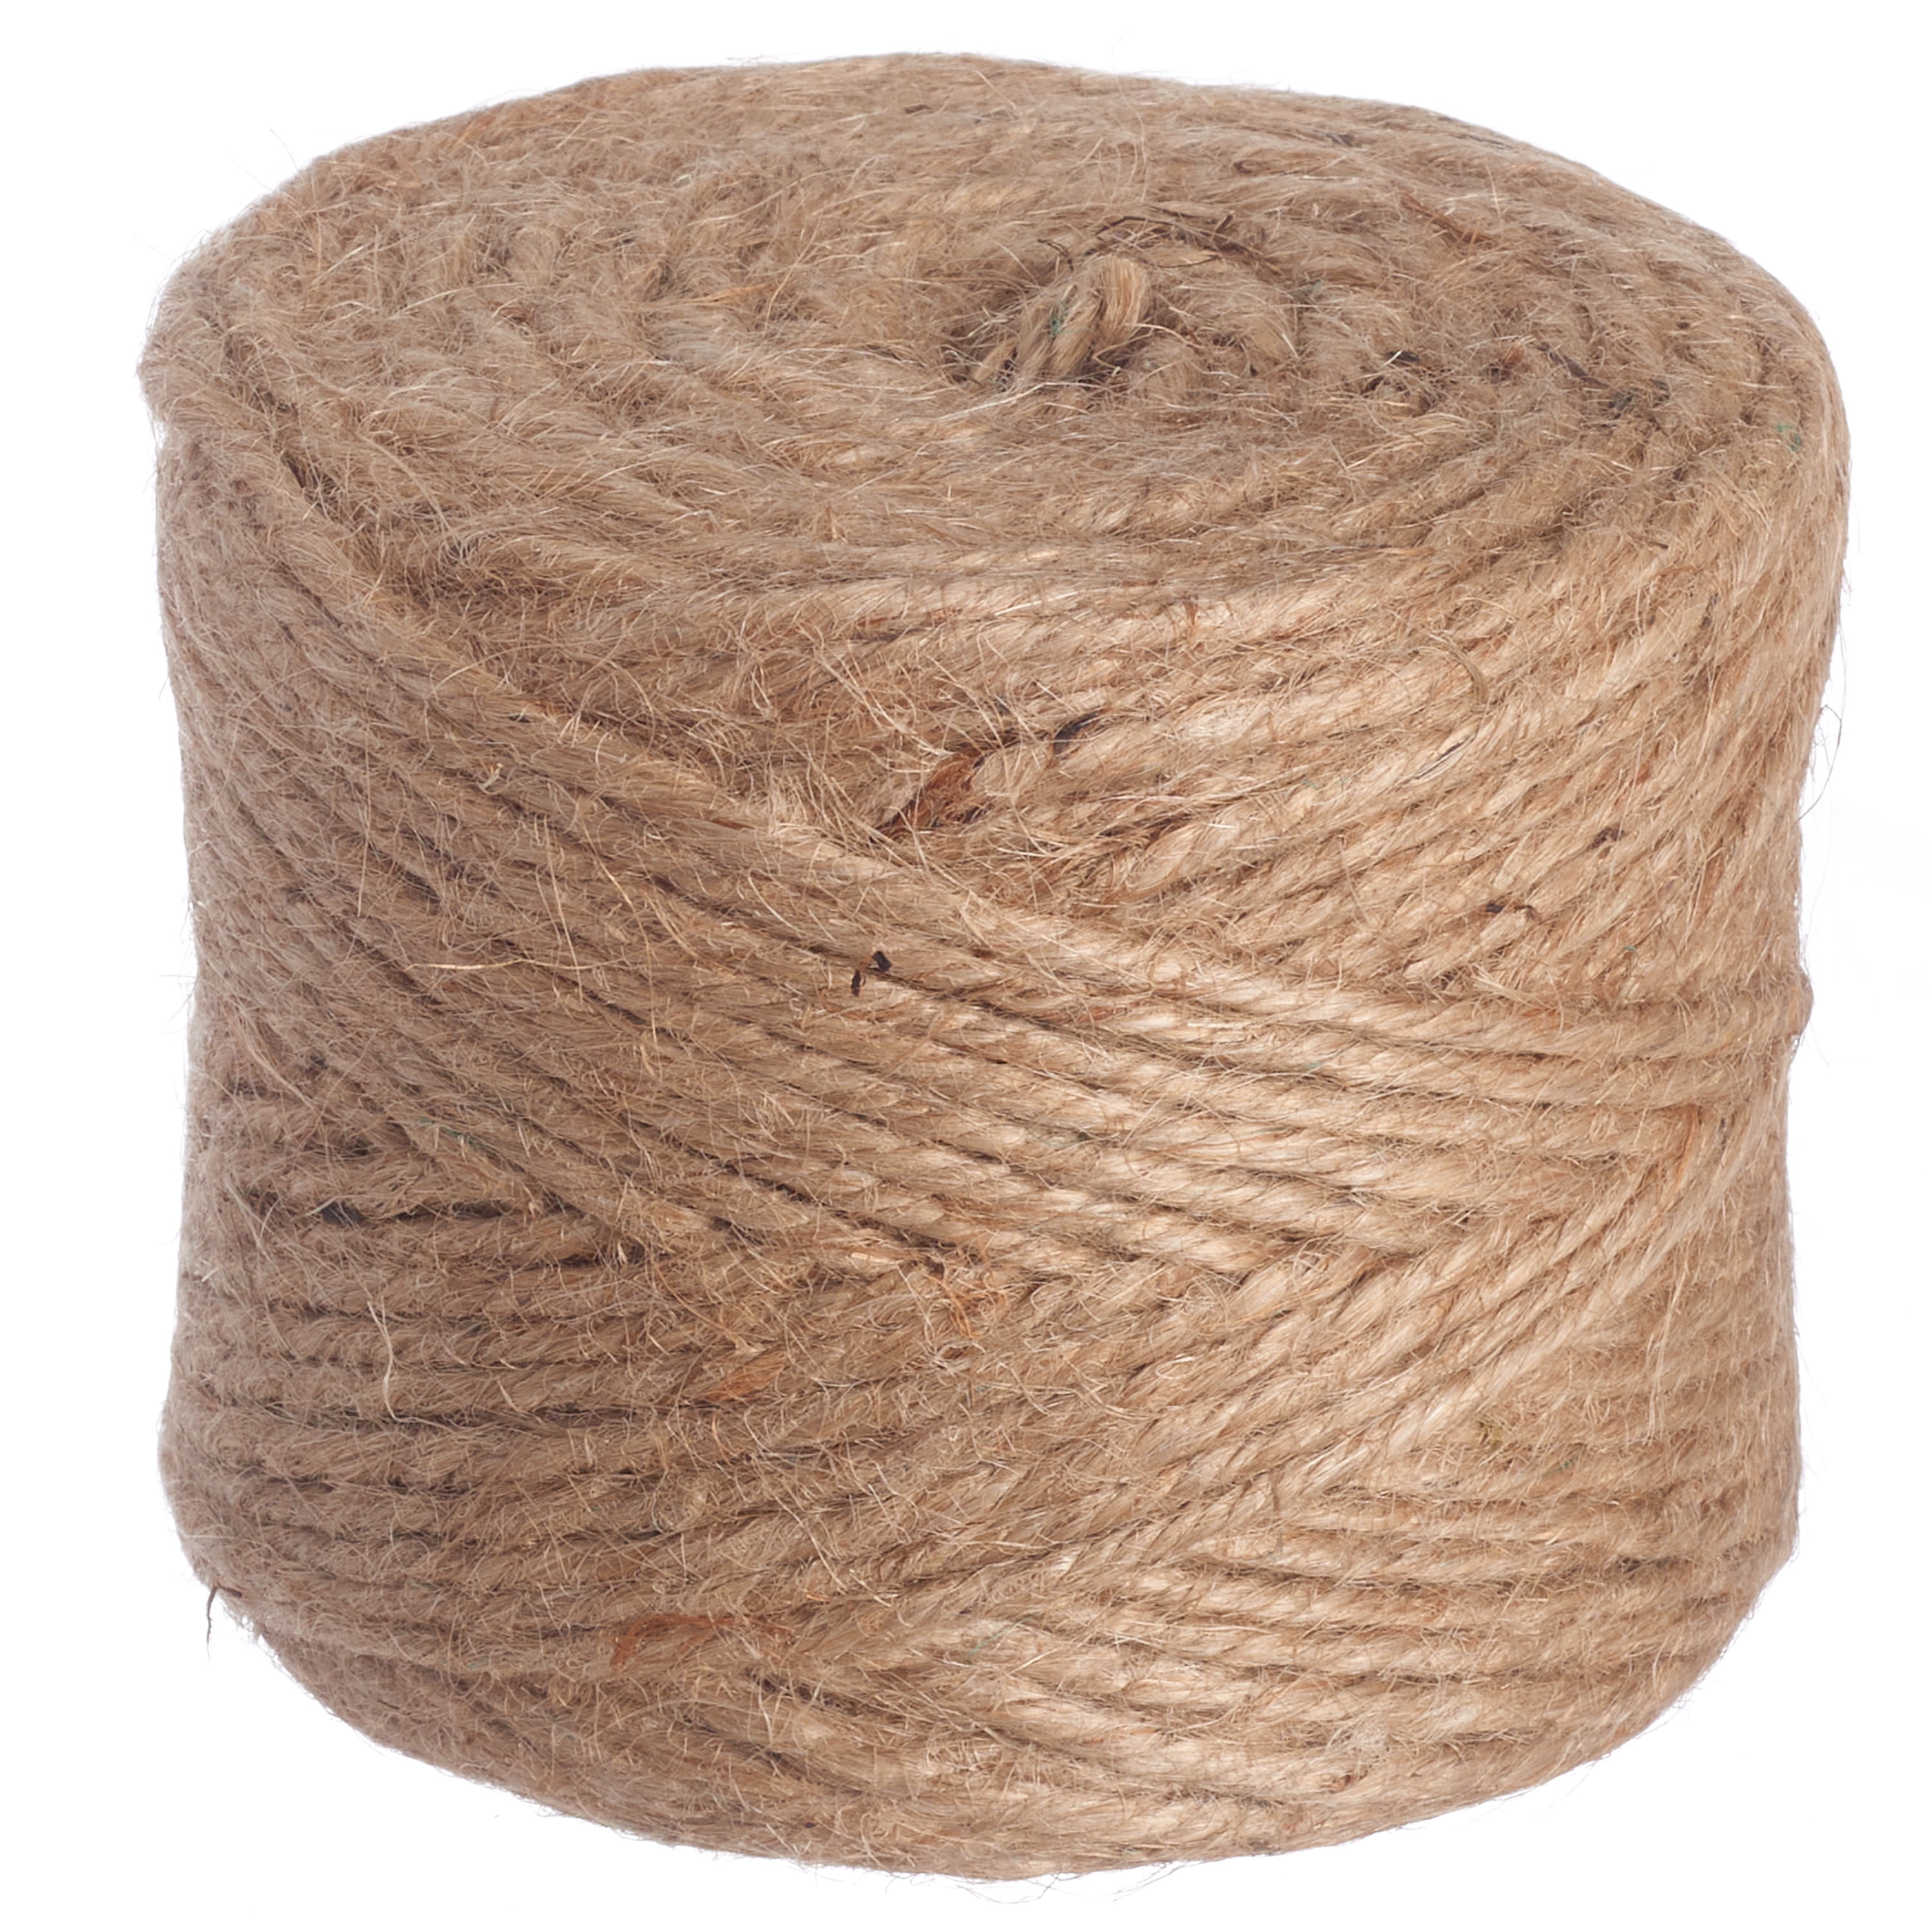 ILIKEEC 328 Feet Jute Rope, 6mm 4-Ply Natural Thick Jute Twine String for  Floristry, DIY Arts Crafts, Gardening Bundling and Cat Scratch Post (Brown)